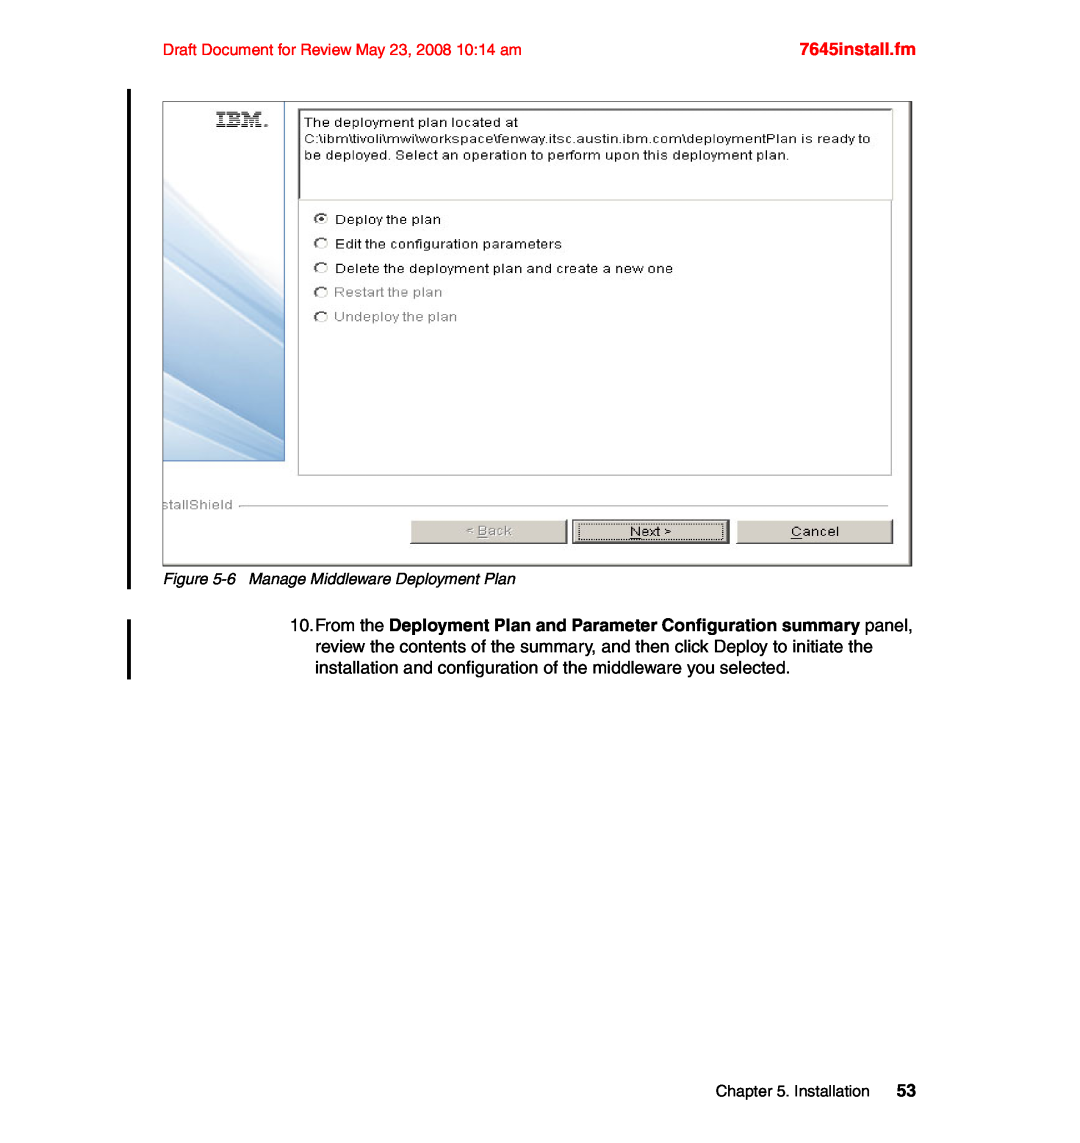 IBM SG24-7645-00 manual 7645install.fm, Draft Document for Review May 23, 2008 10:14 am, 6Manage Middleware Deployment Plan 